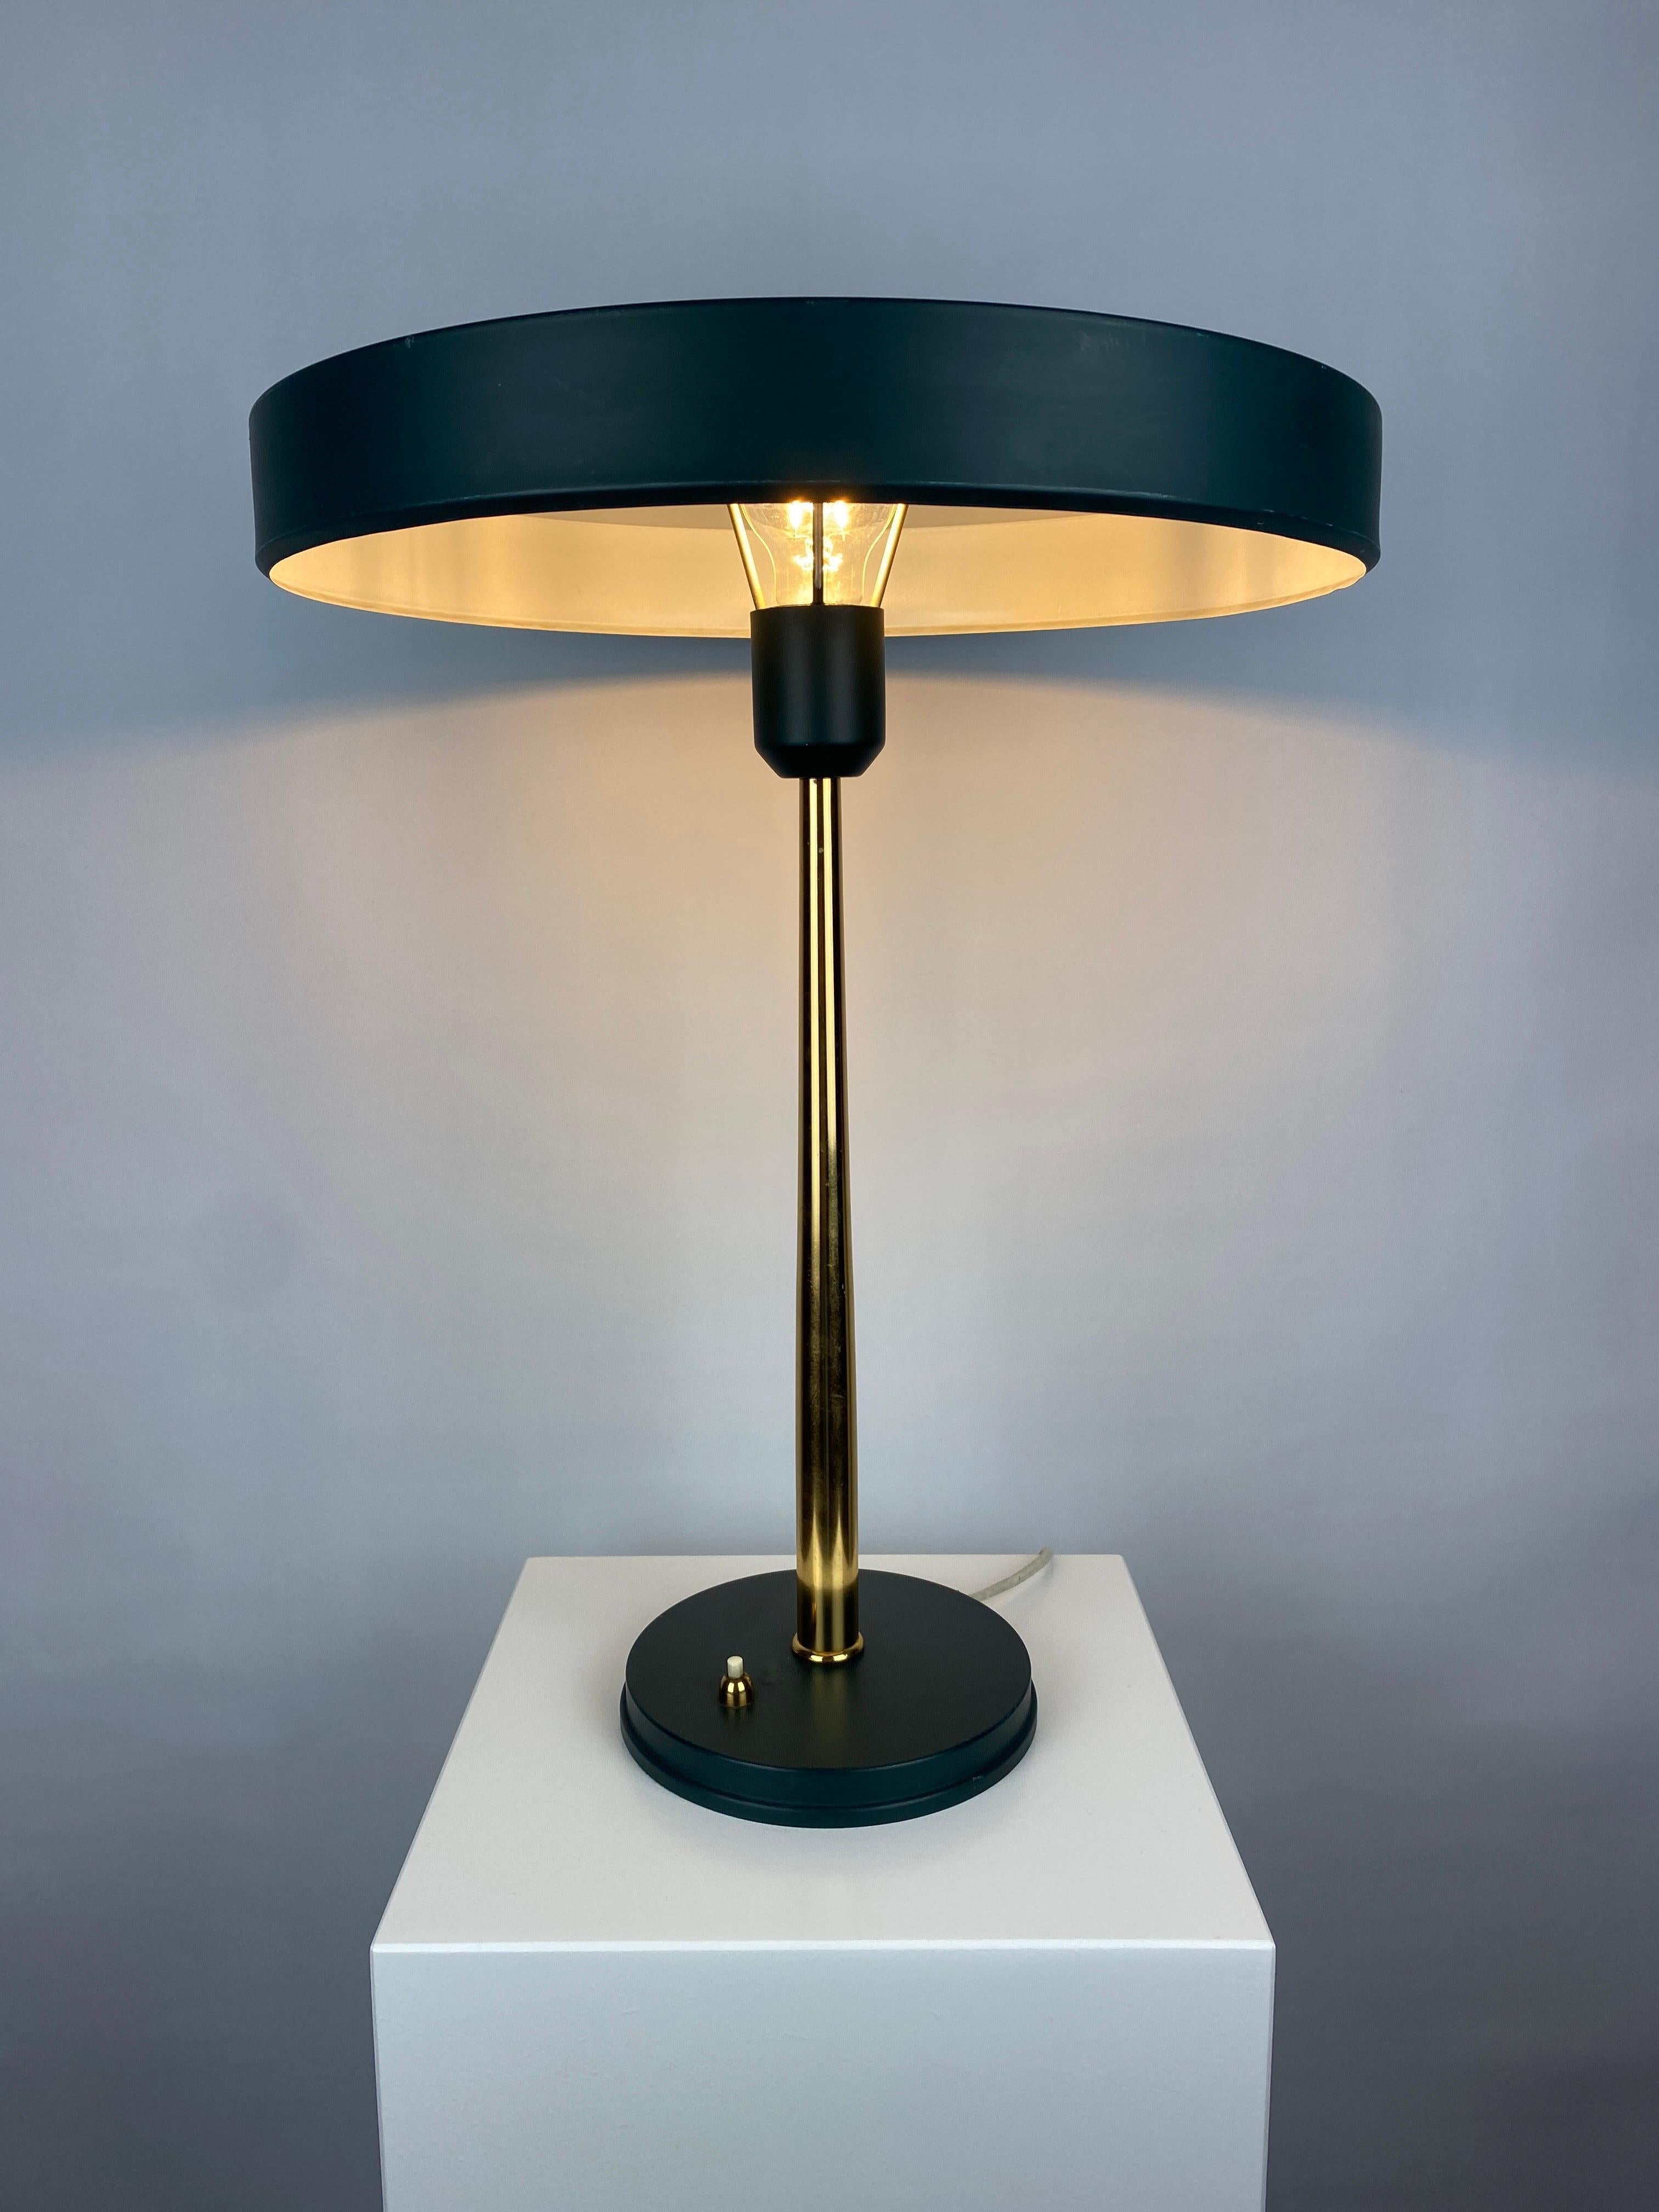 Great design by Louis 'Christiaan' Kalff for Philips called Timor 69 Desk Lamp. It is manufactured in 1970 - 1980. This version is in dark green and gold, and has a UFO lampshade with a hole in the middle for ahead mirror